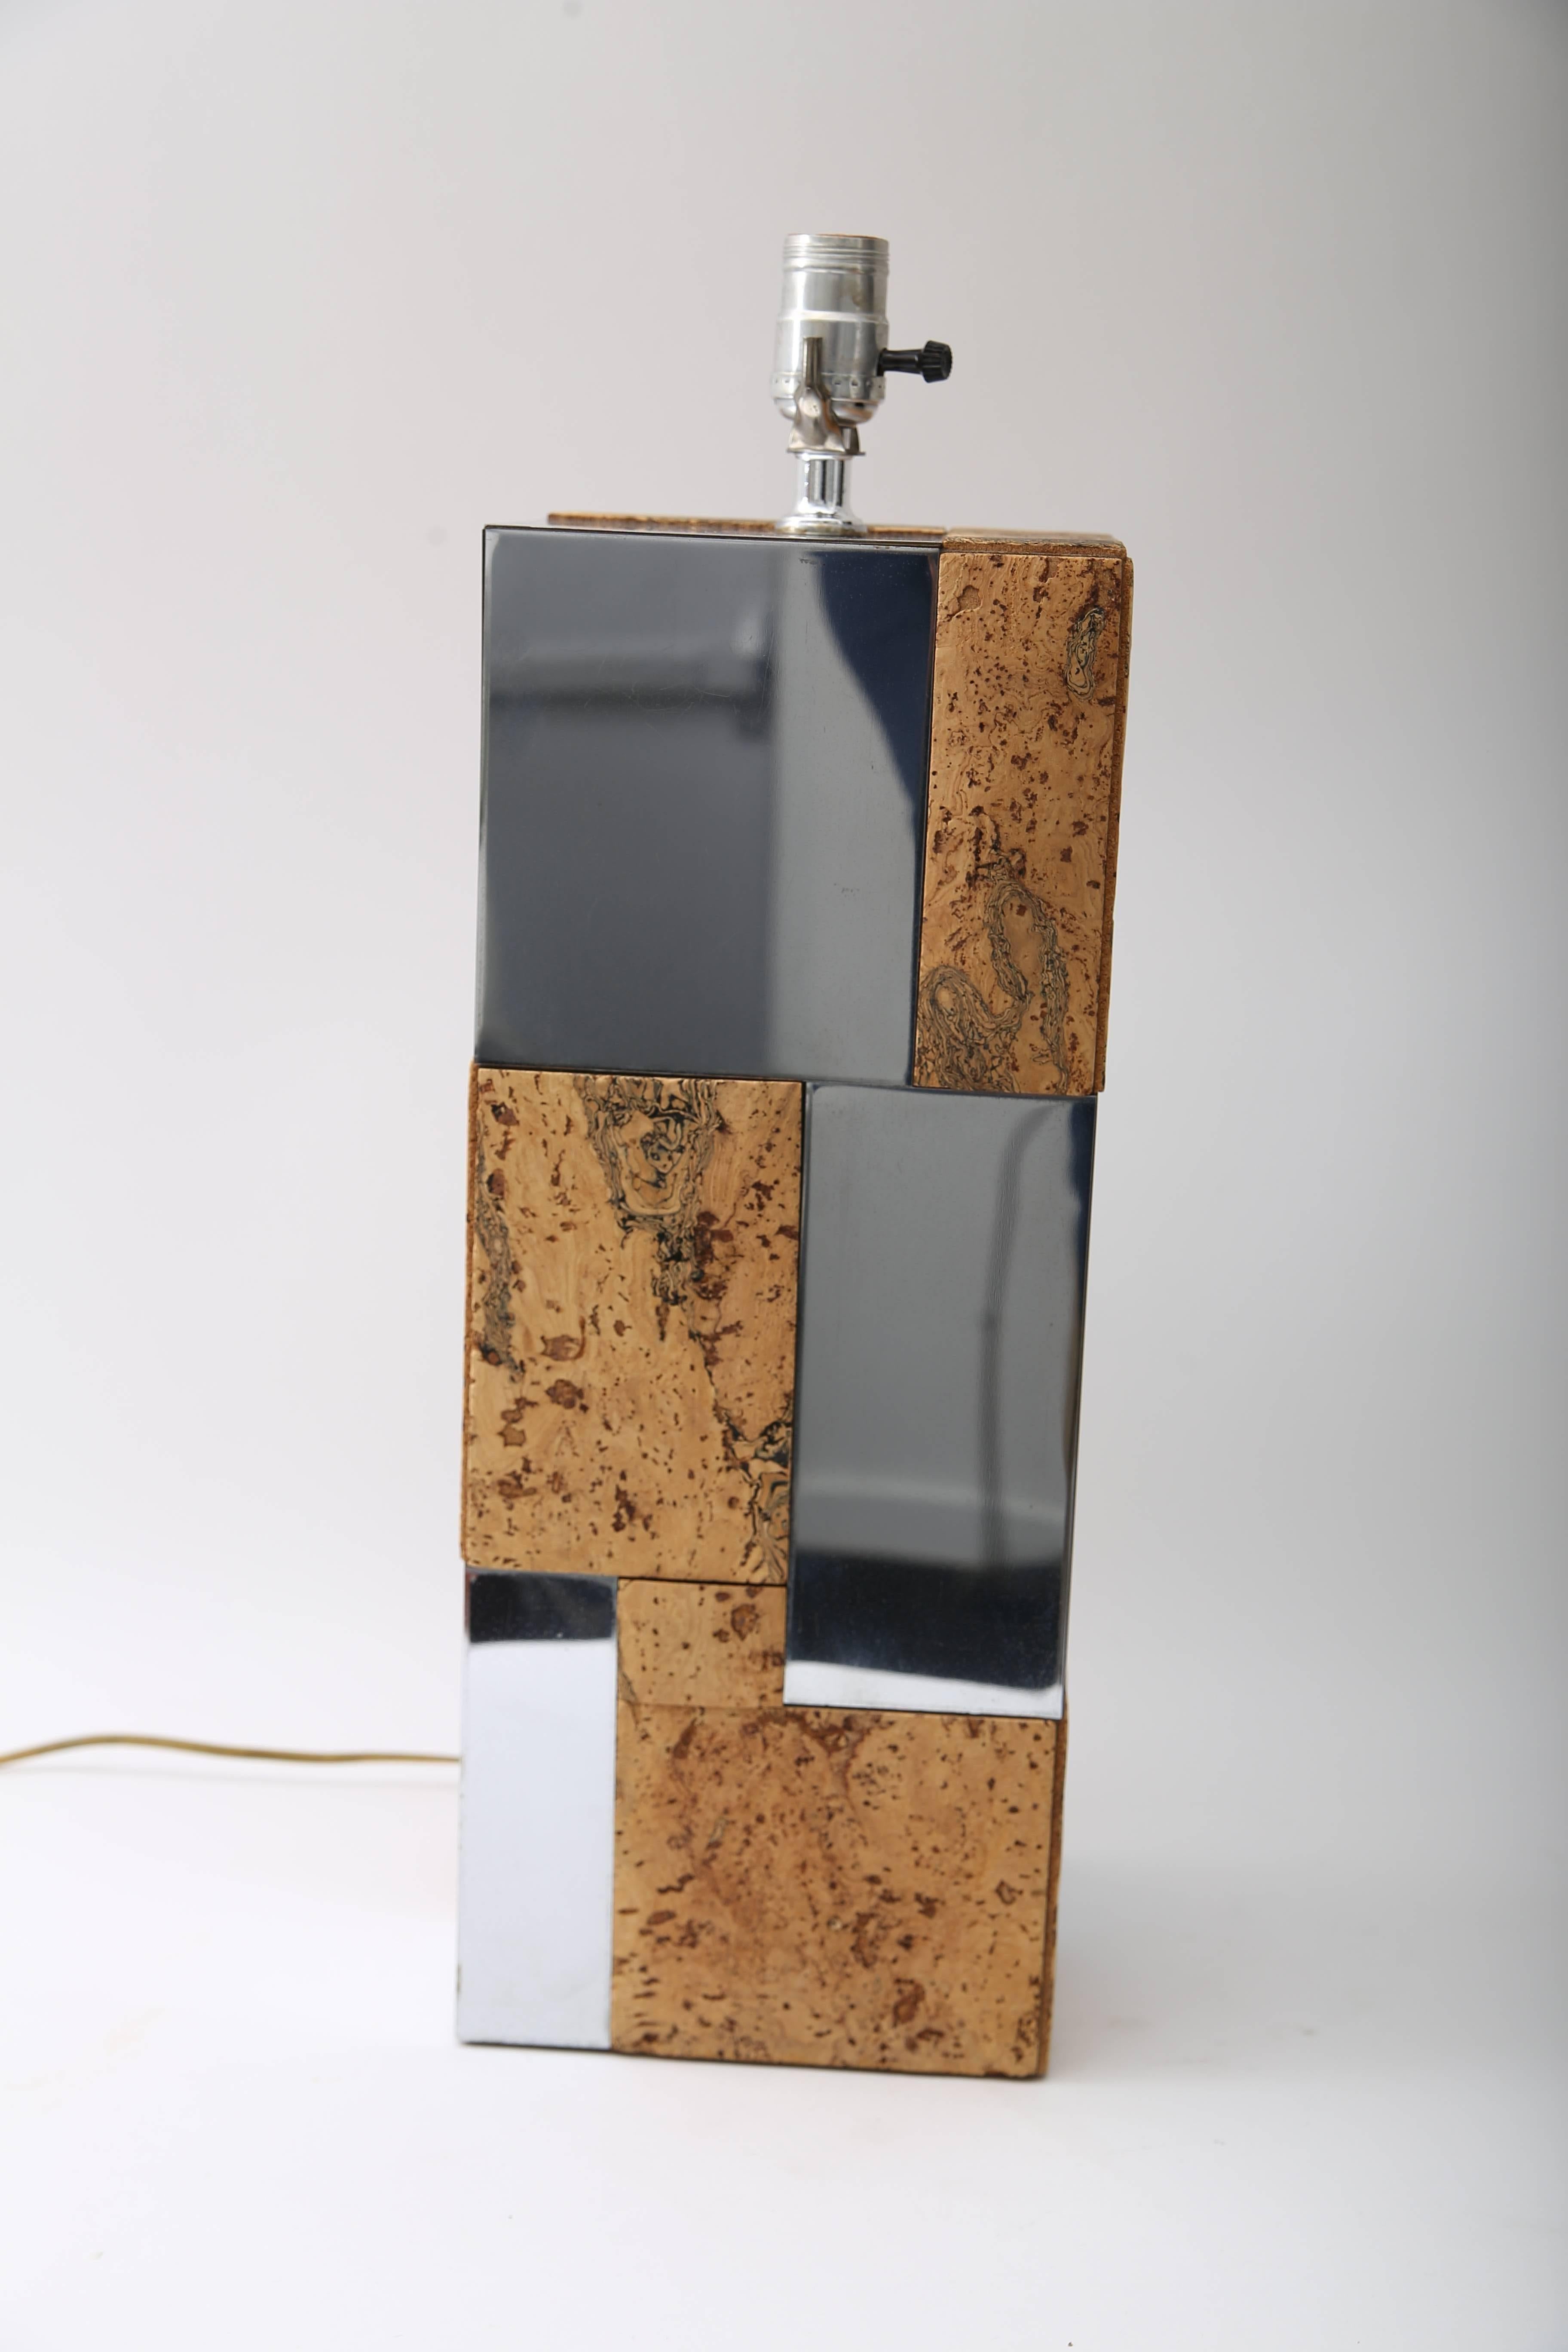 This stylish table lamp dates to the 1970s and is fabricated in cork and polished chrome in a 